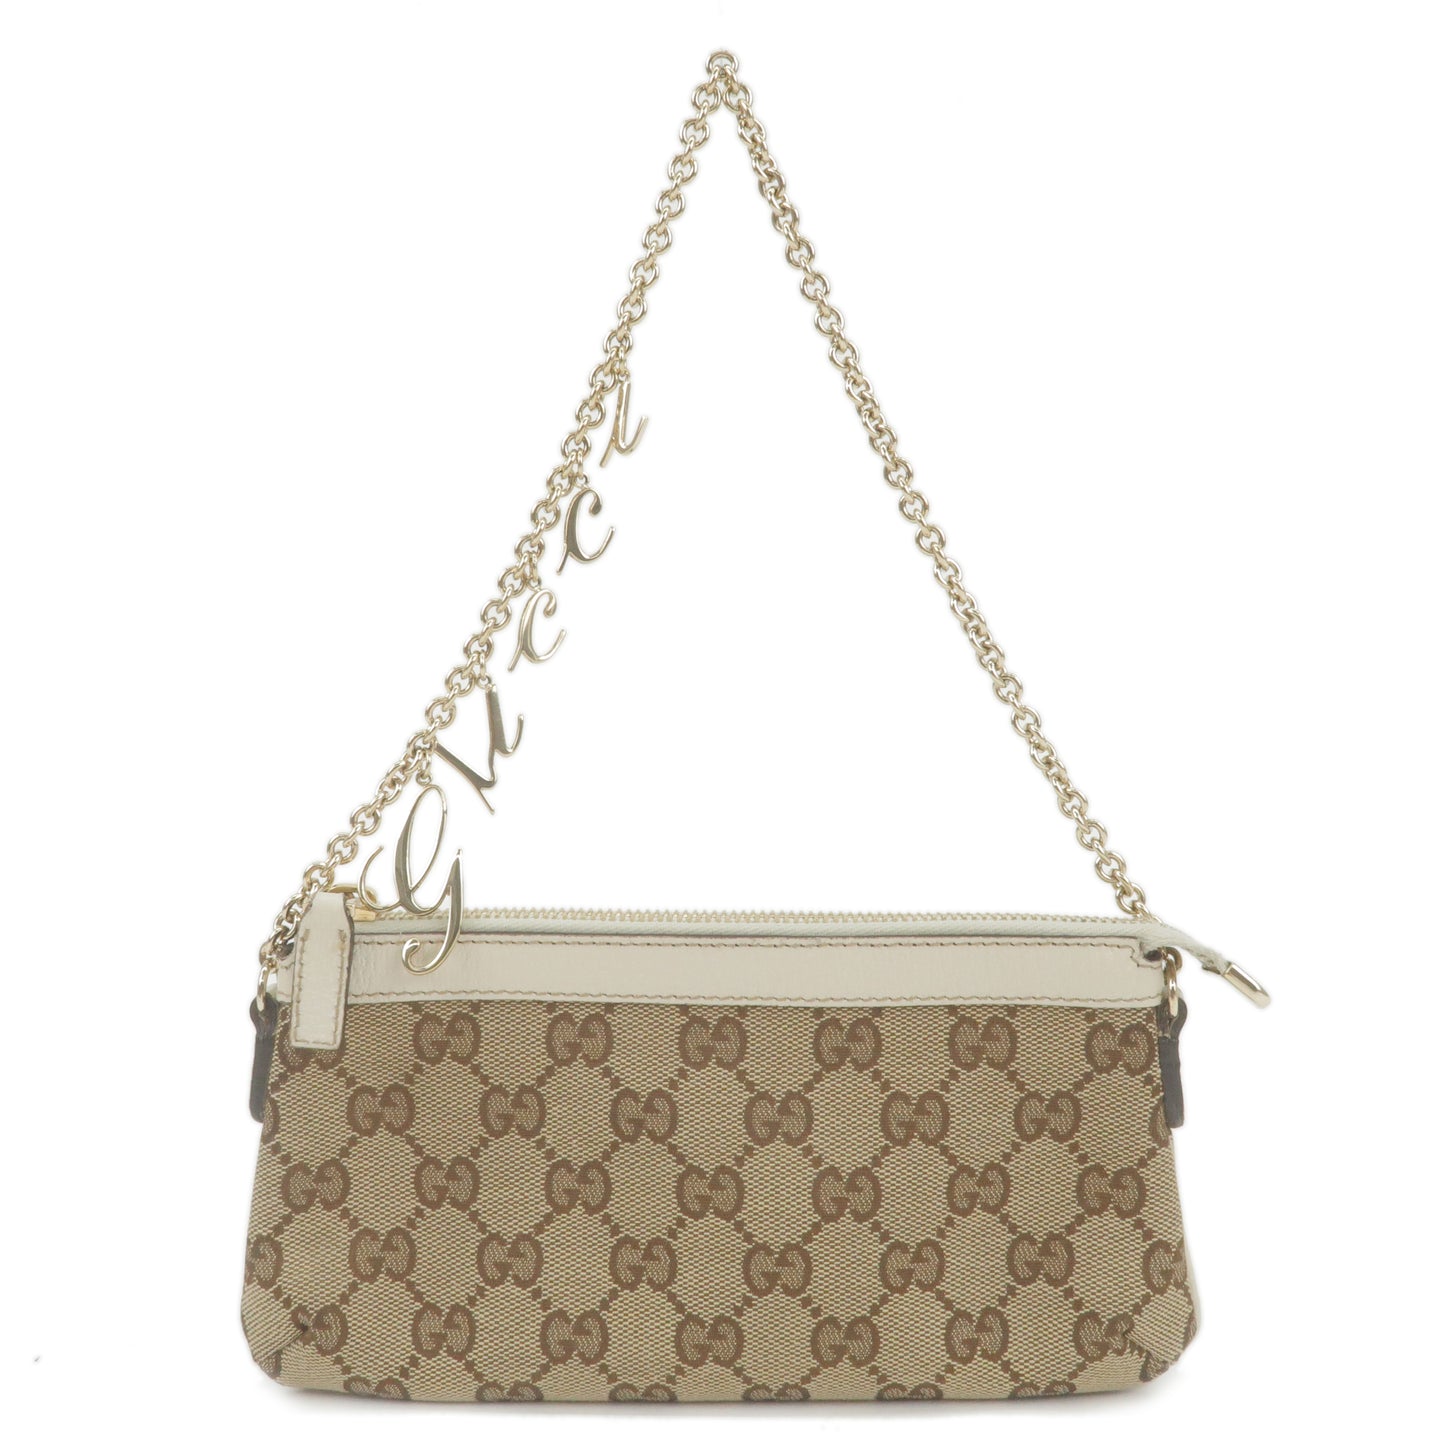 GUCCI-GG-Canvas-Leather-Chain-Pouch-Bag-Beige-Ivory-120940